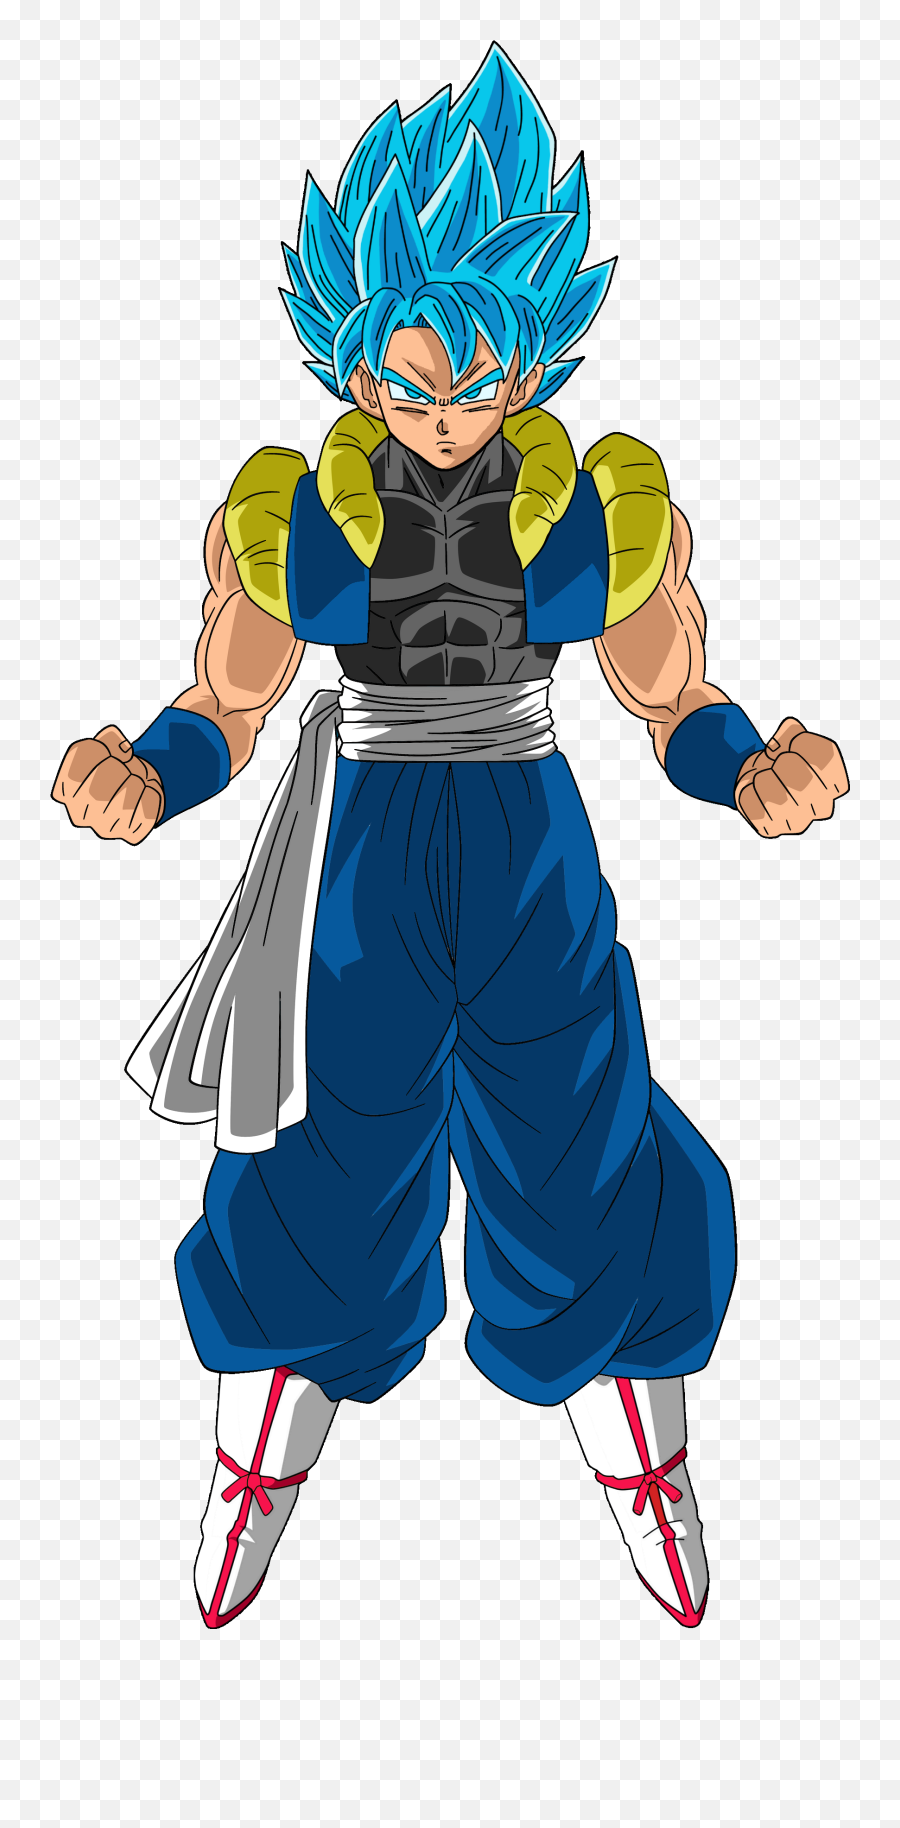 What Is The Most Downplayed Version Of Goku For You And - God Fusion Goku Png,1280x720 Goku Icon Top Left Corner Wallpapr